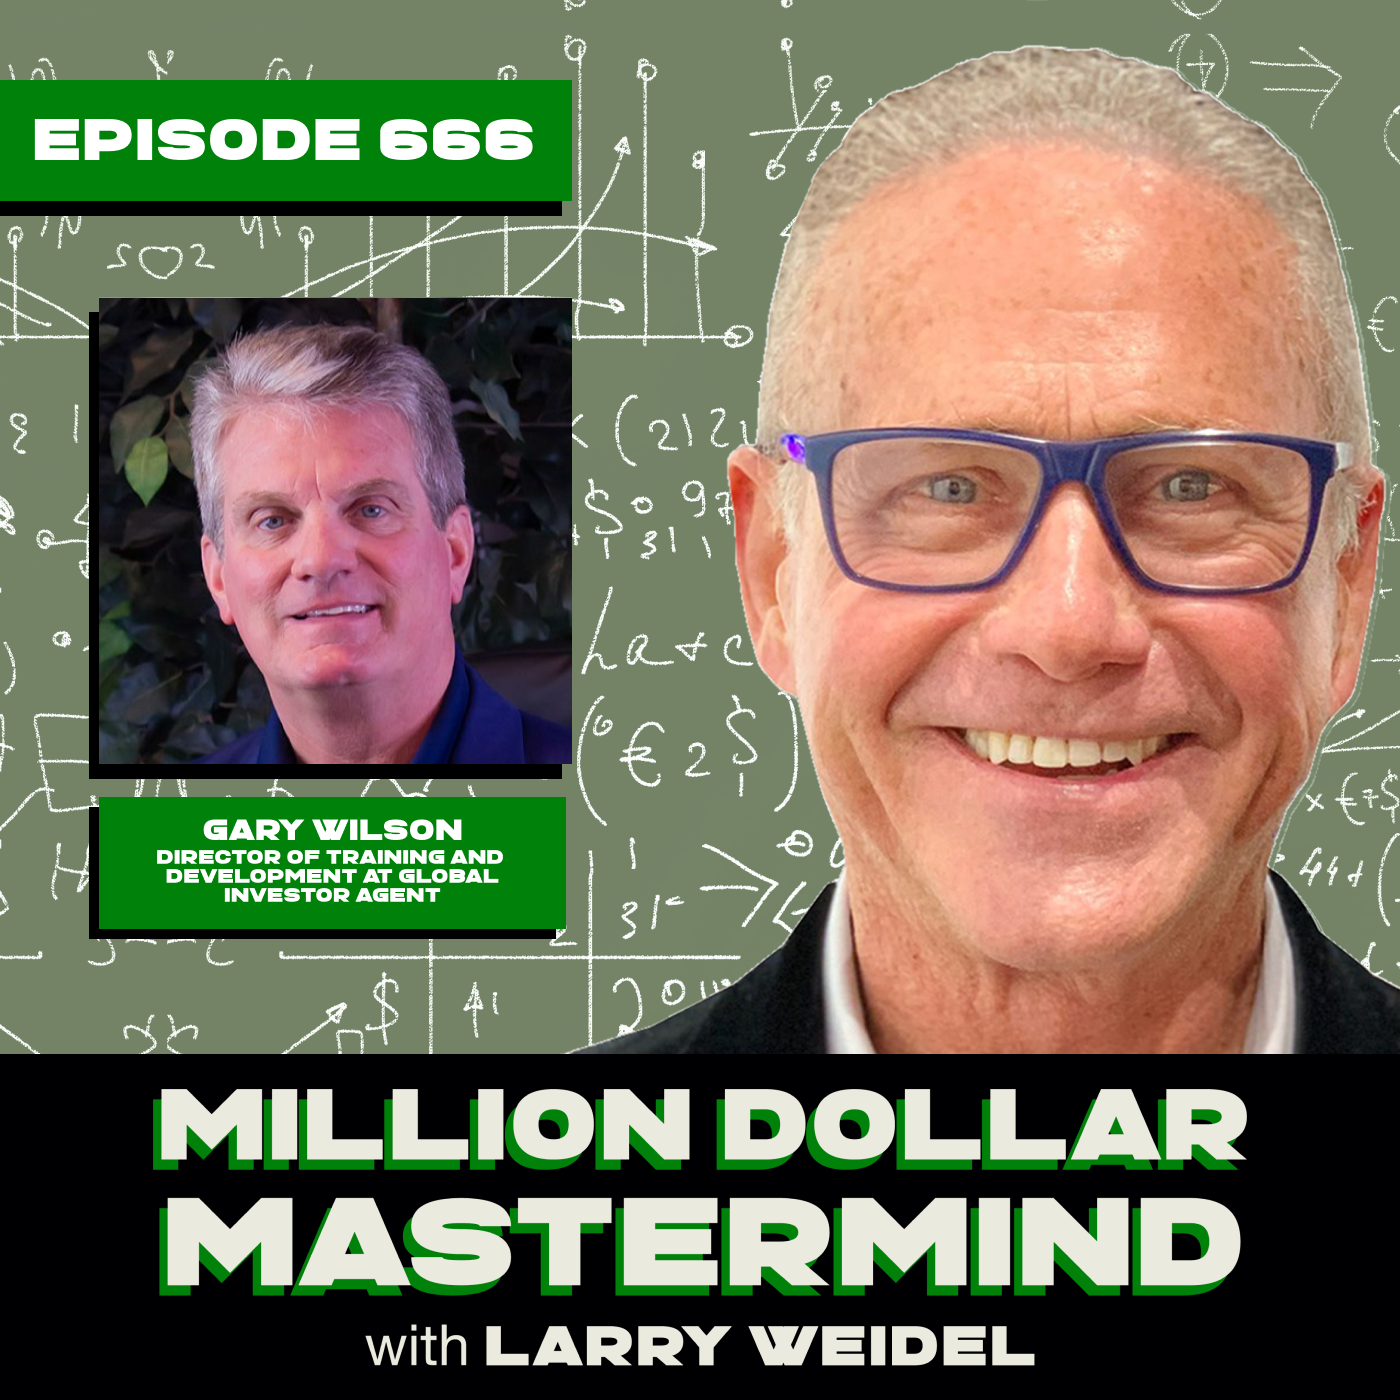 Episode #666 - Offense & Defense: The Dual Agent with Gary Wilson, Founder of Global Investor Agent